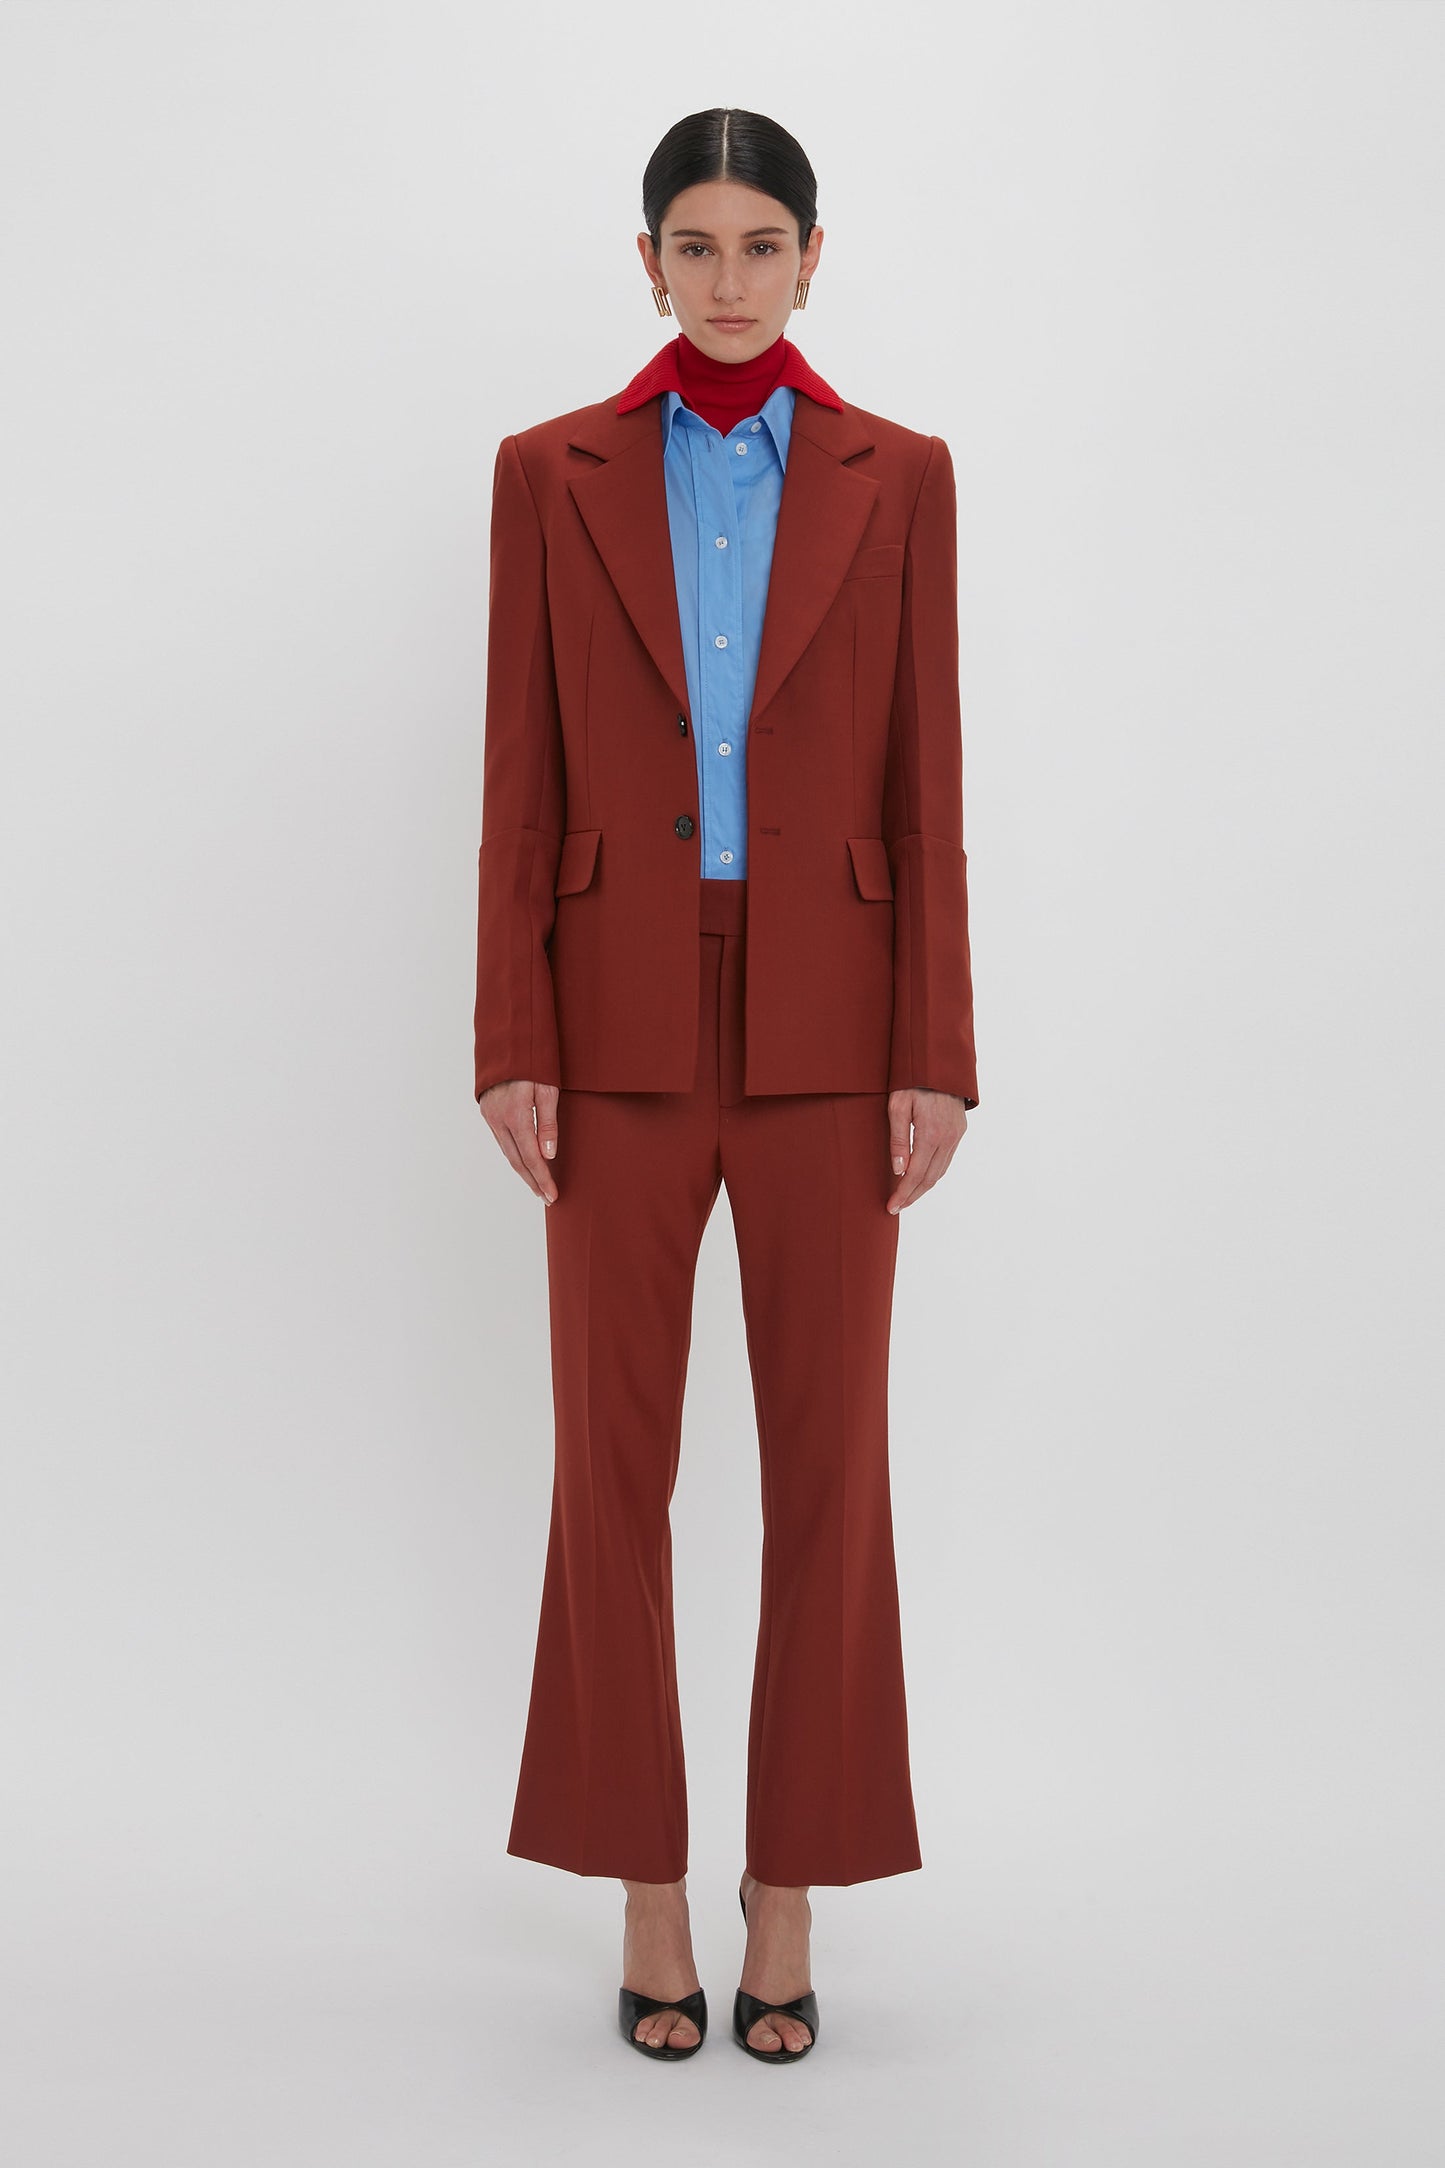 A person stands against a plain background, wearing the Sleeve Detail Patch Pocket Jacket In Russet from Victoria Beckham, paired with a blue shirt and red neck scarf. They are also wearing black open-toe heels.